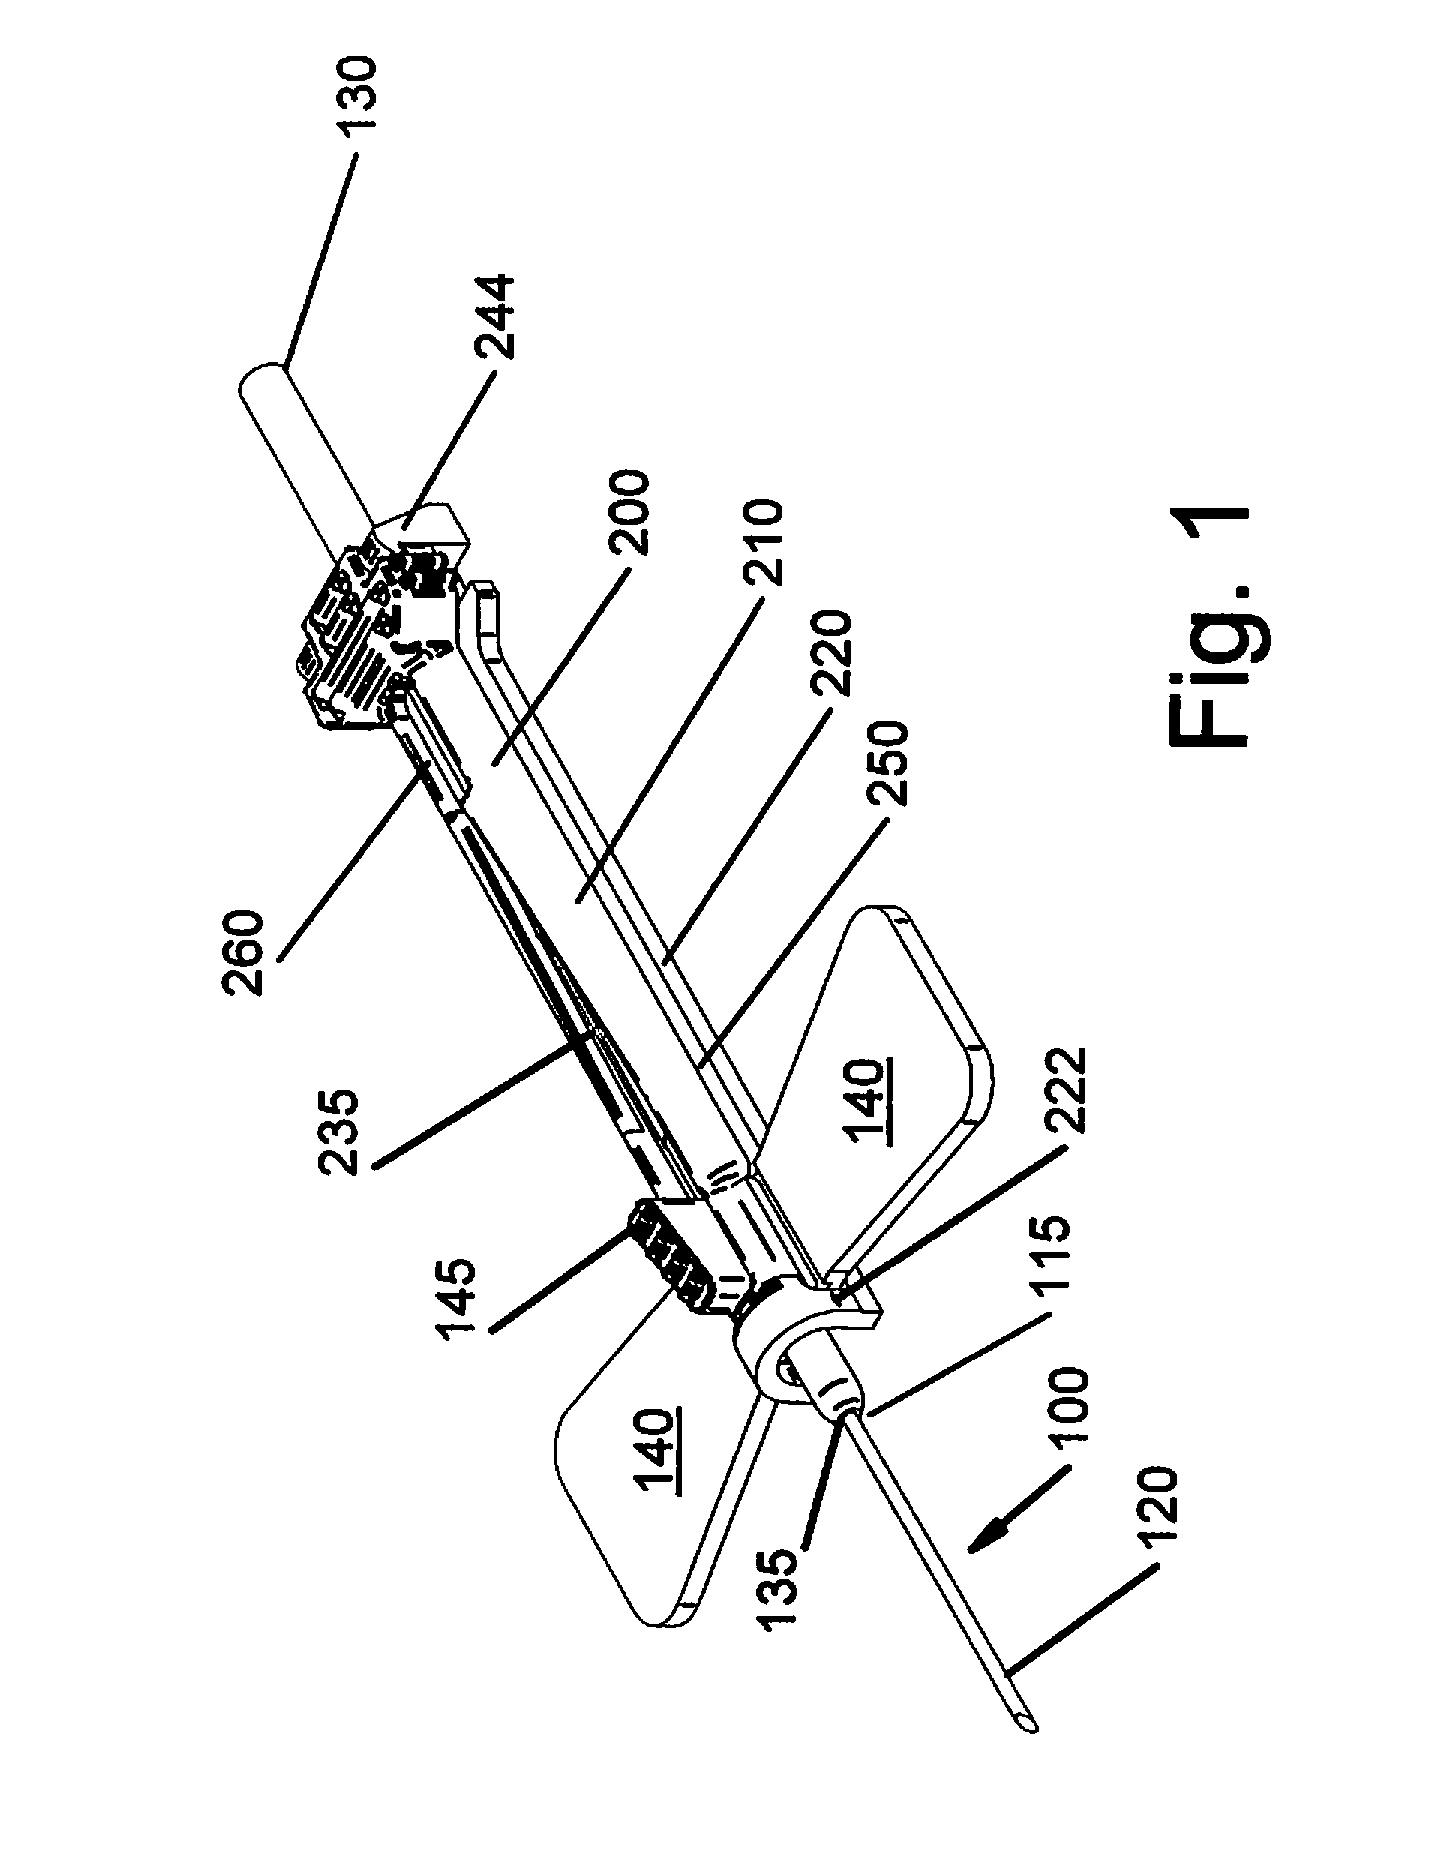 I.v. infusion or blood collection apparatus